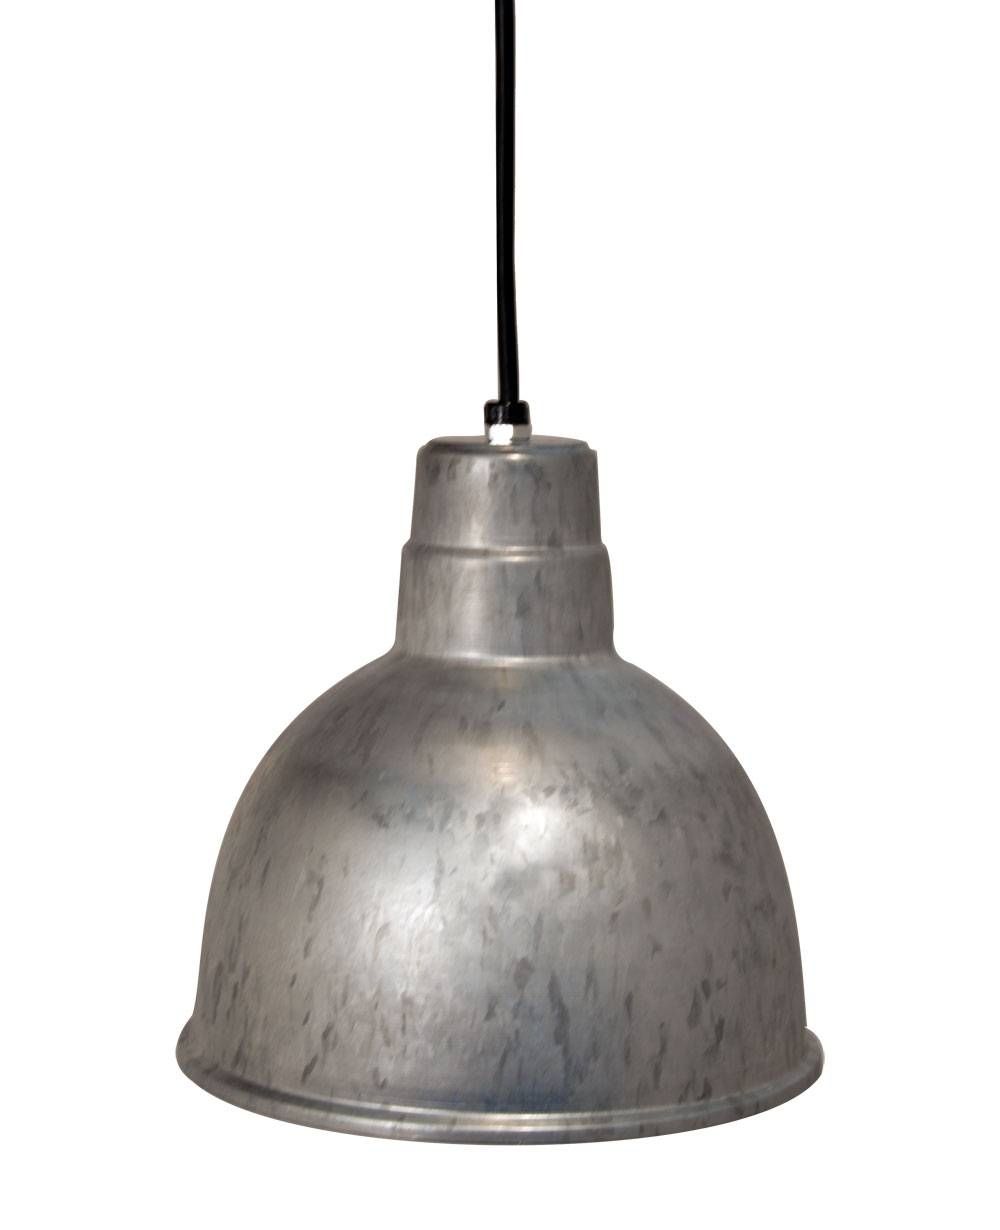 Trend Barn Lighting Pendant 14 About Remodel Track Pendant Lights With Barn Pendant Light Fixtures (View 2 of 15)